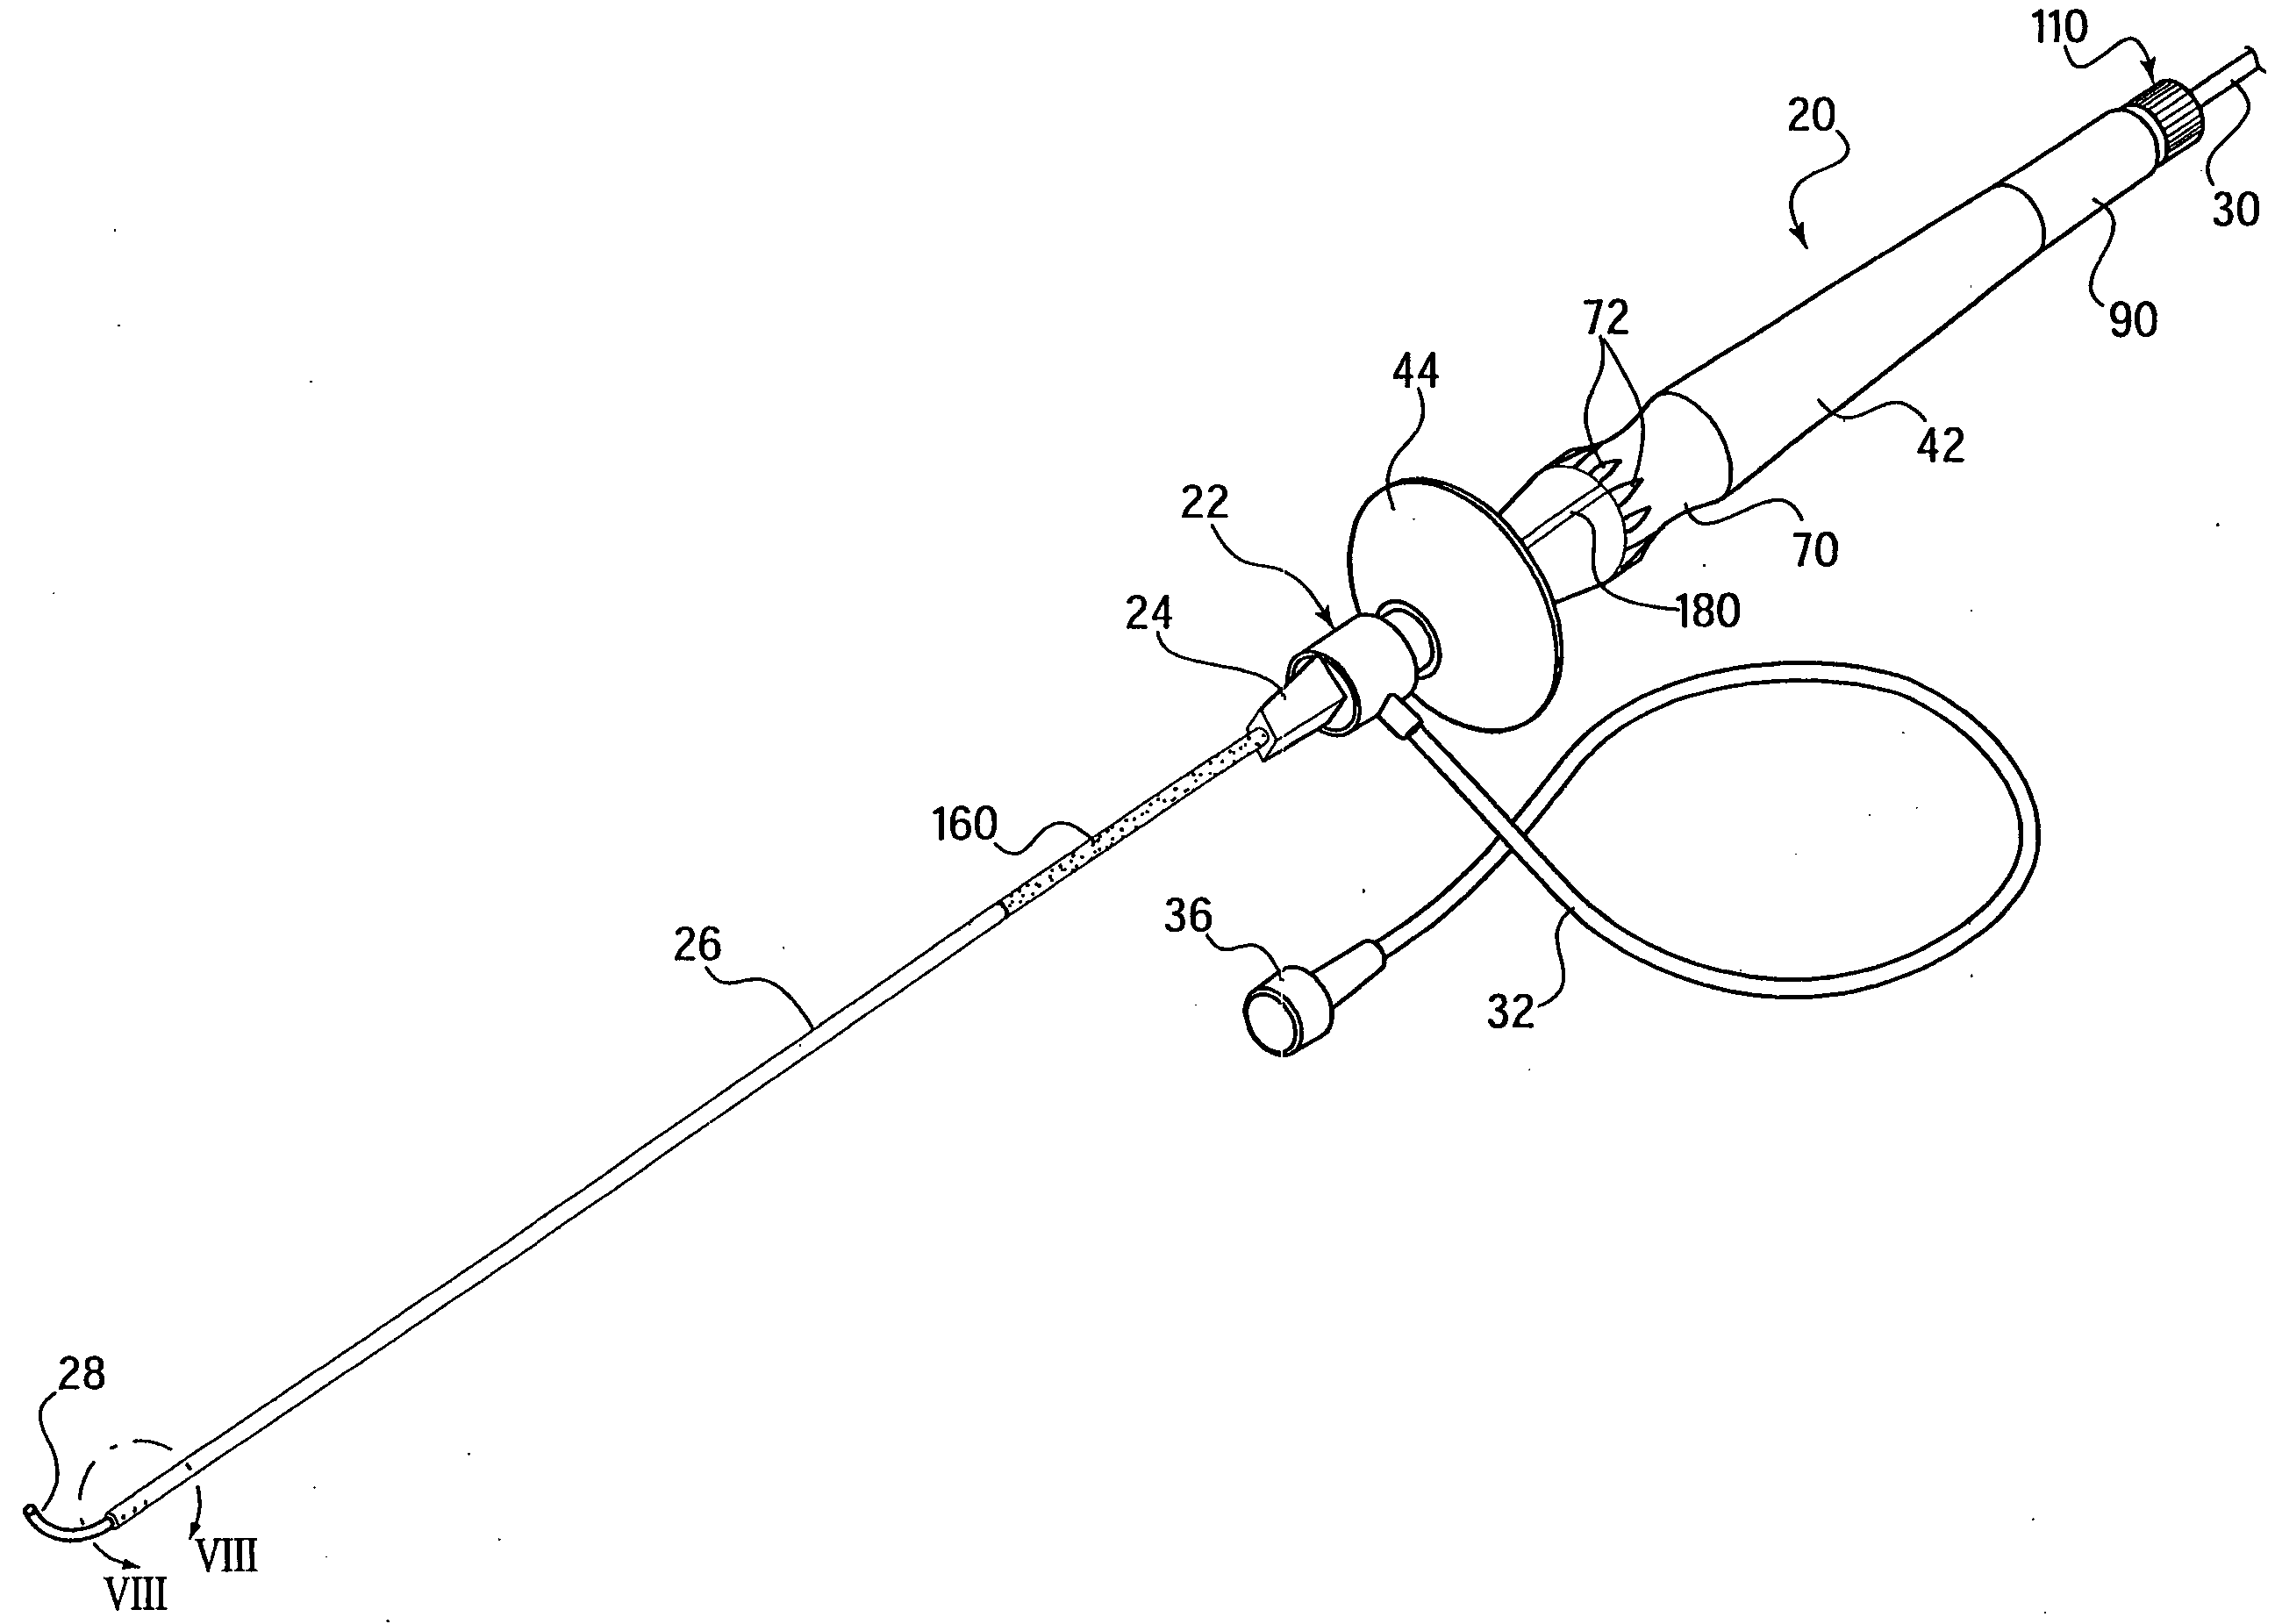 Apparatus and method for using a steerable catheter device